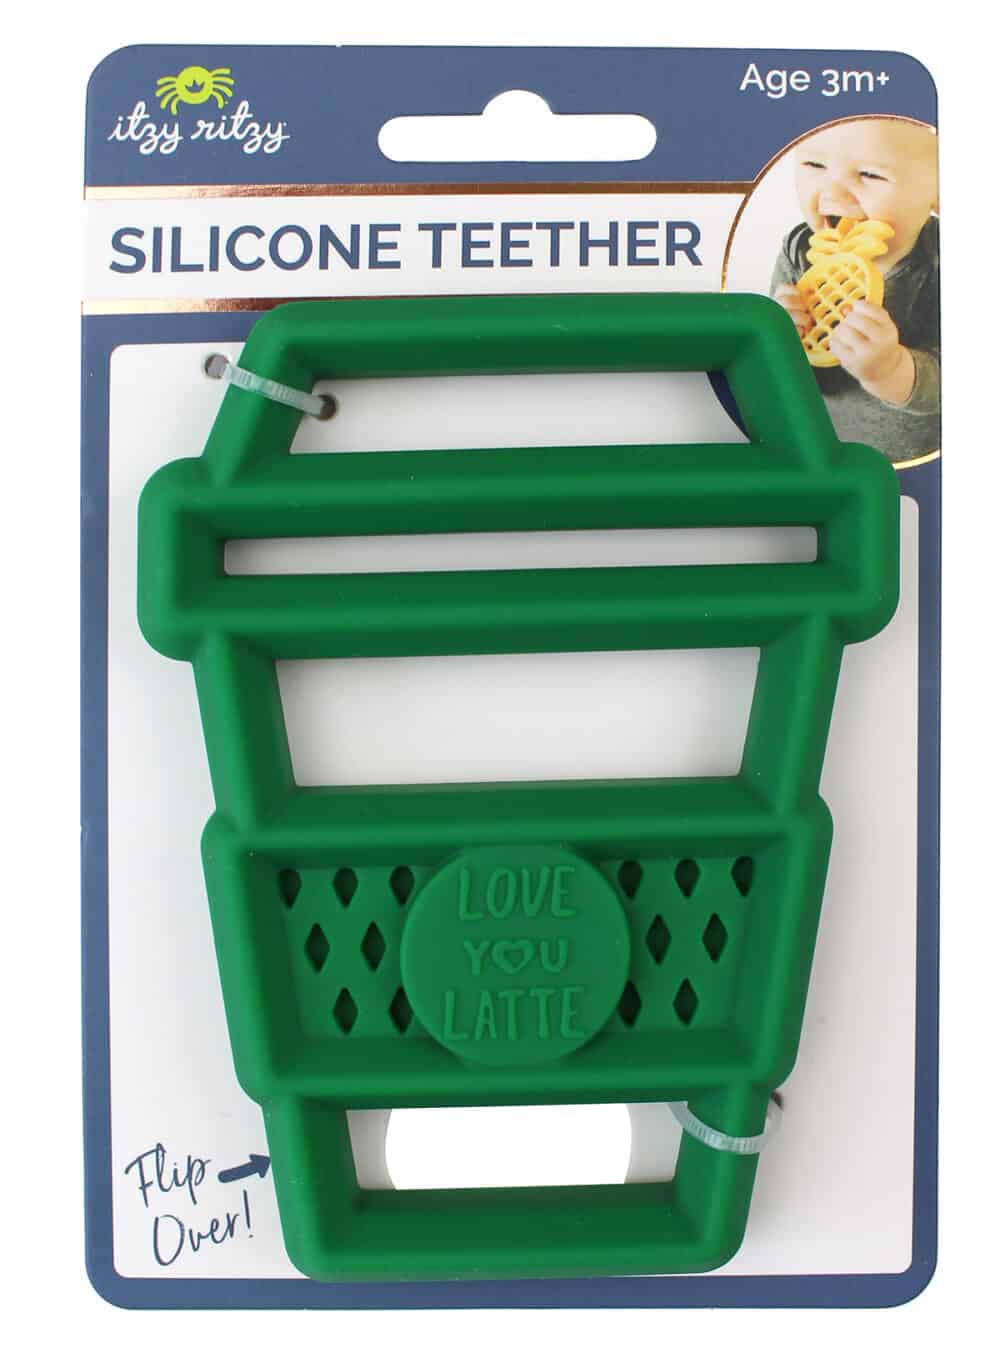 A Chew Crew Silicone Baby Teether in a package.